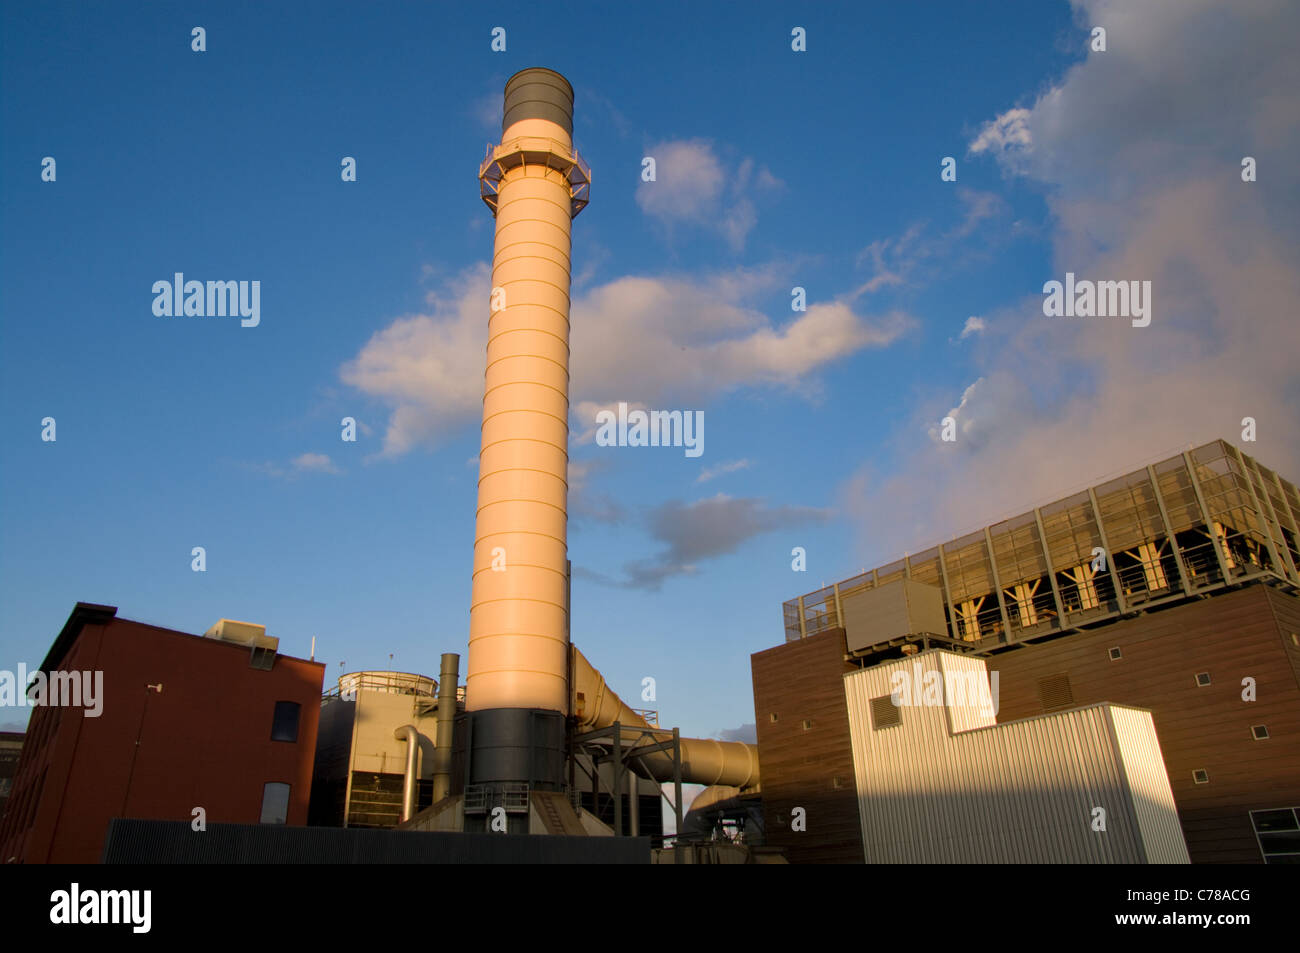 District energy facility showing smokestack and central power station Stock Photo